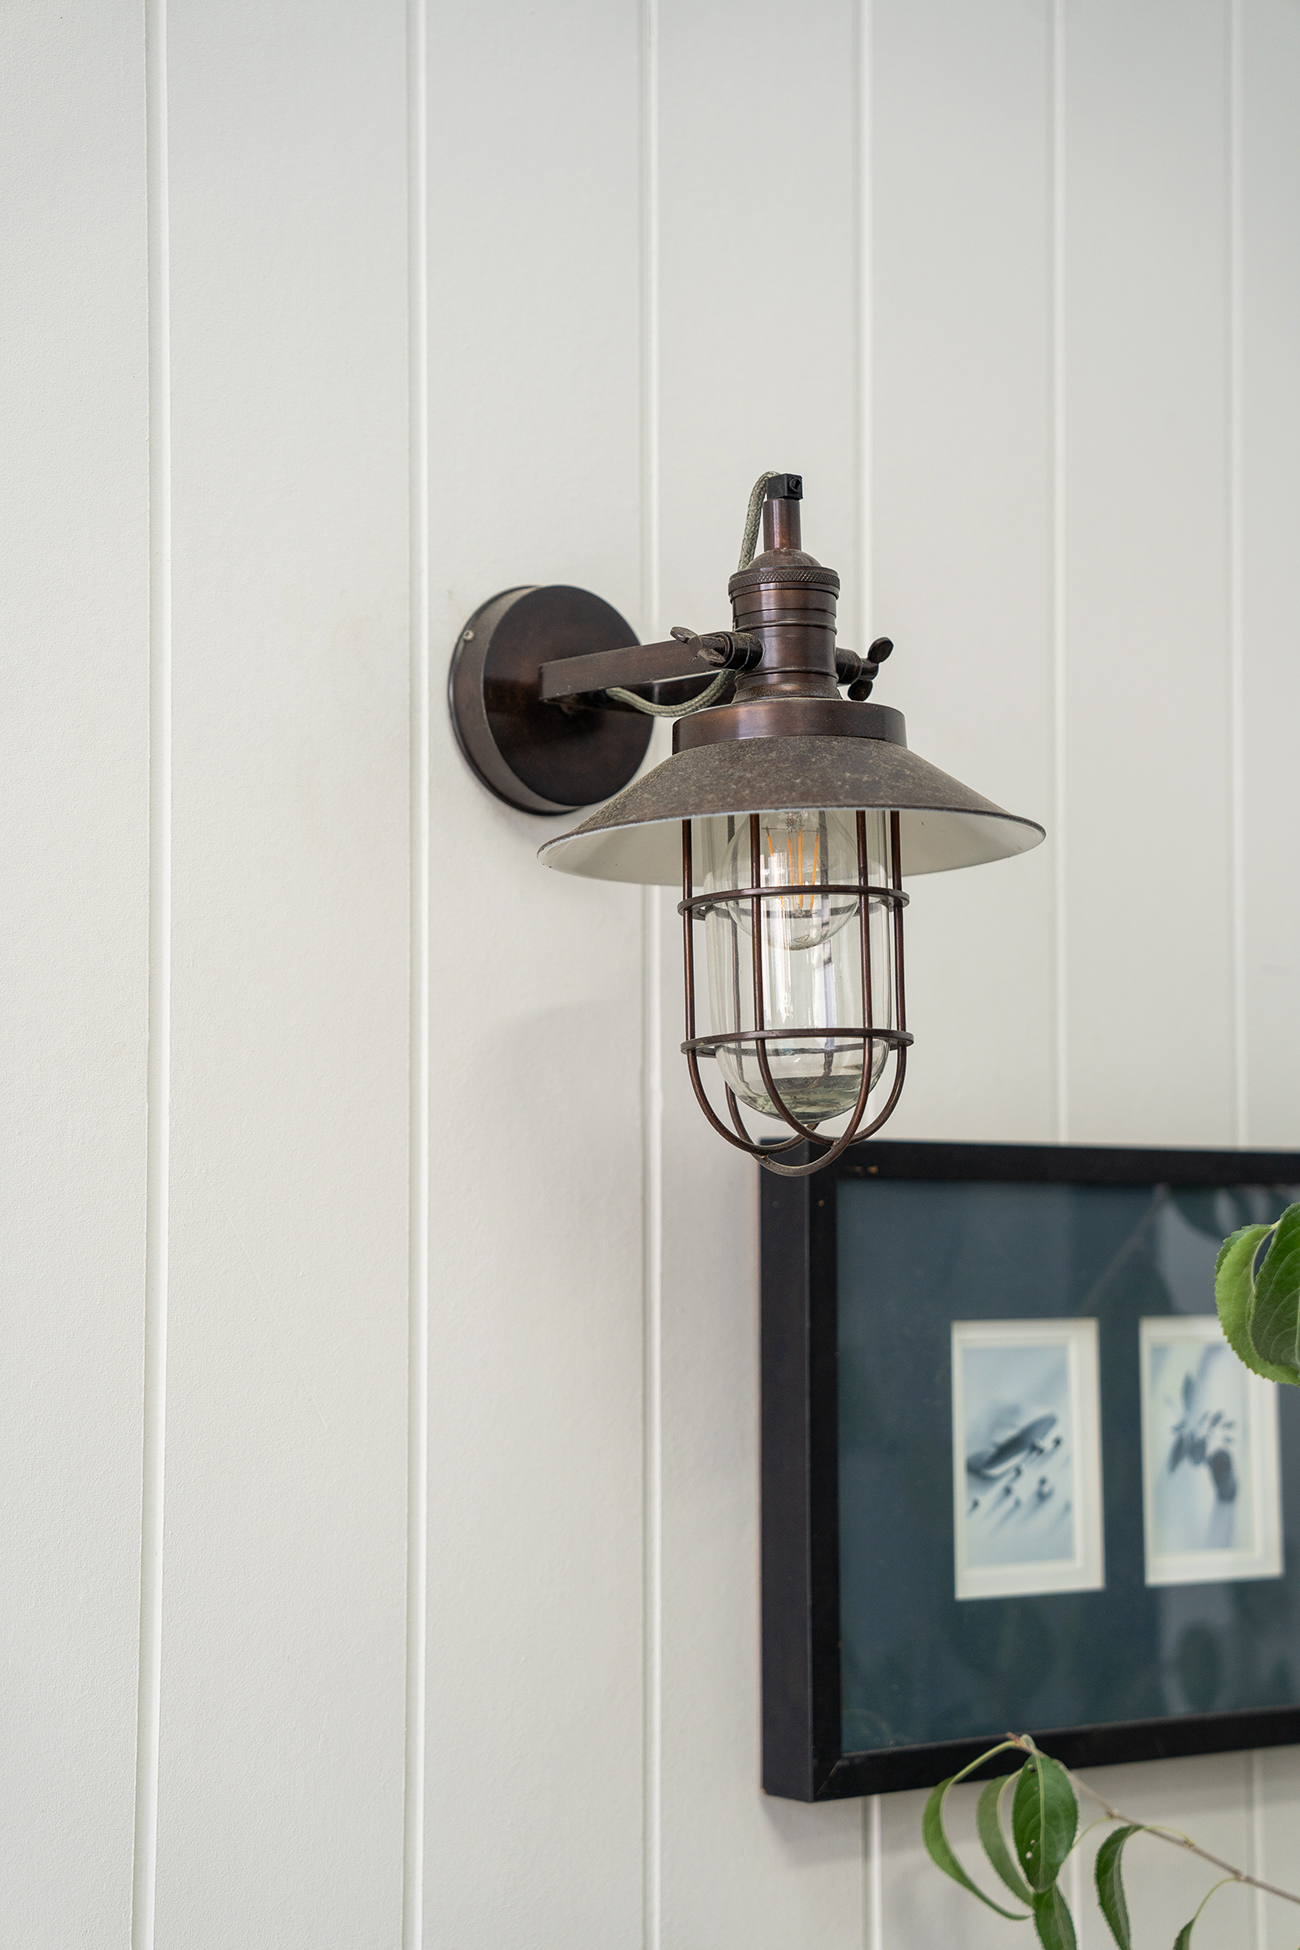 Antique barn light mounted on an outdoor wall.